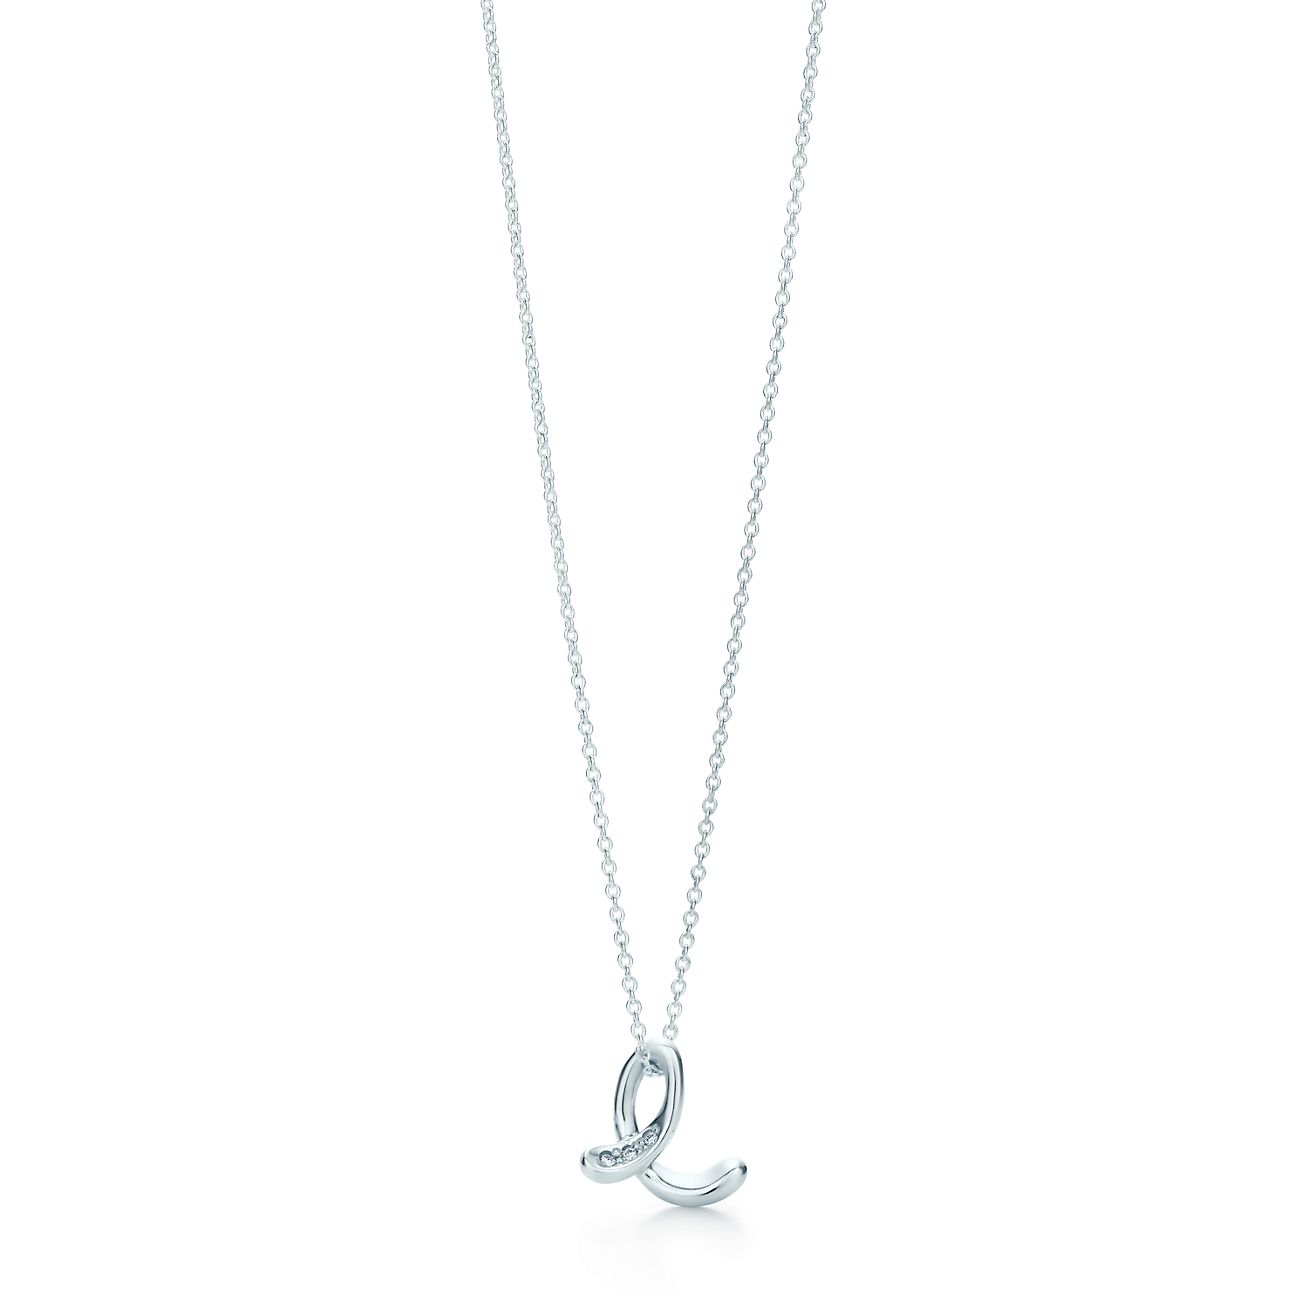 tiffany letter charm necklace